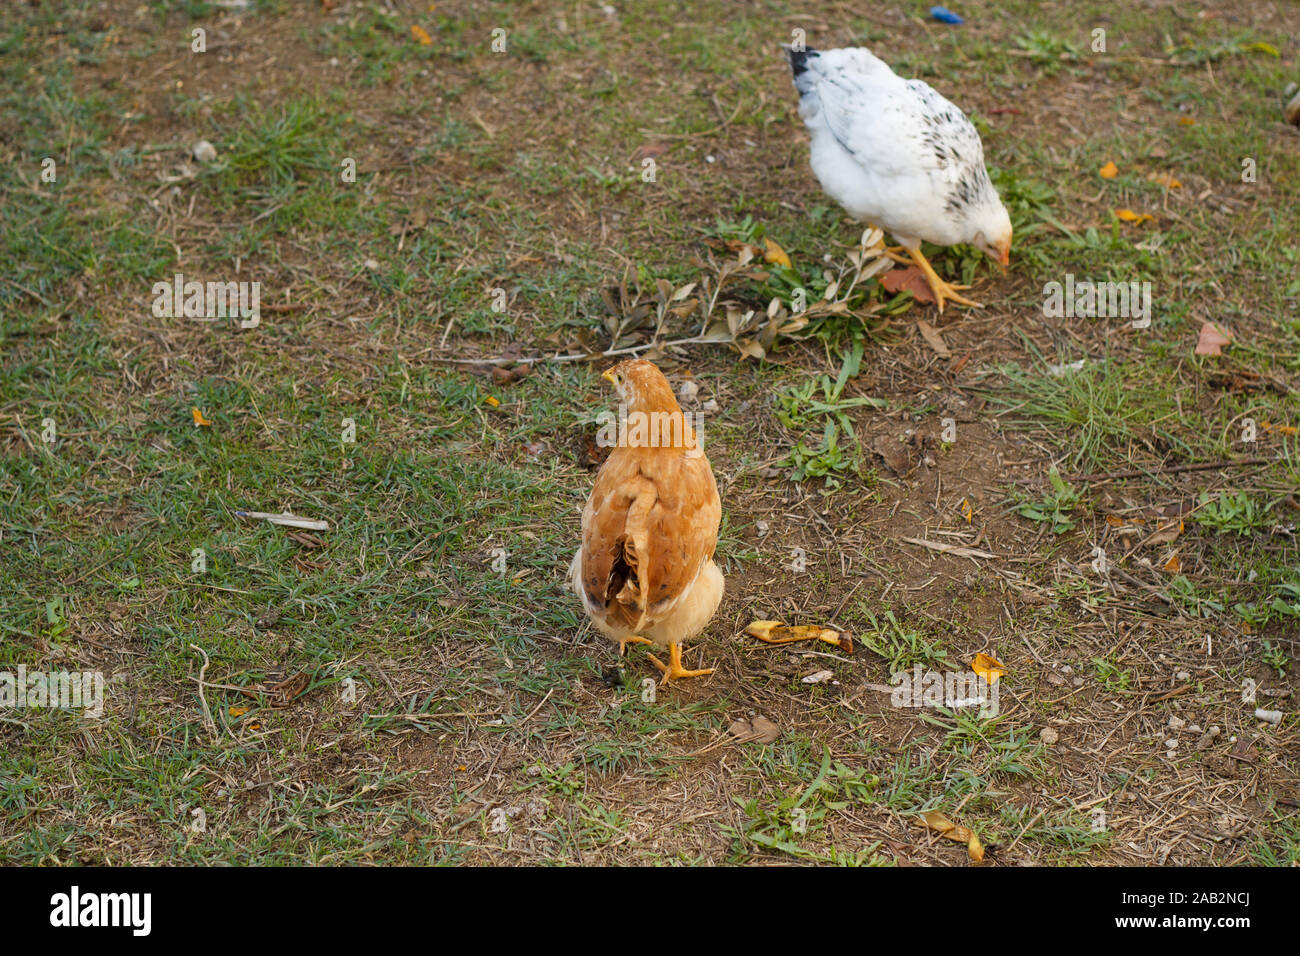 Little chickens walking in the yard and pecking green grass. Poultry farming. Rural life. Stock Photo